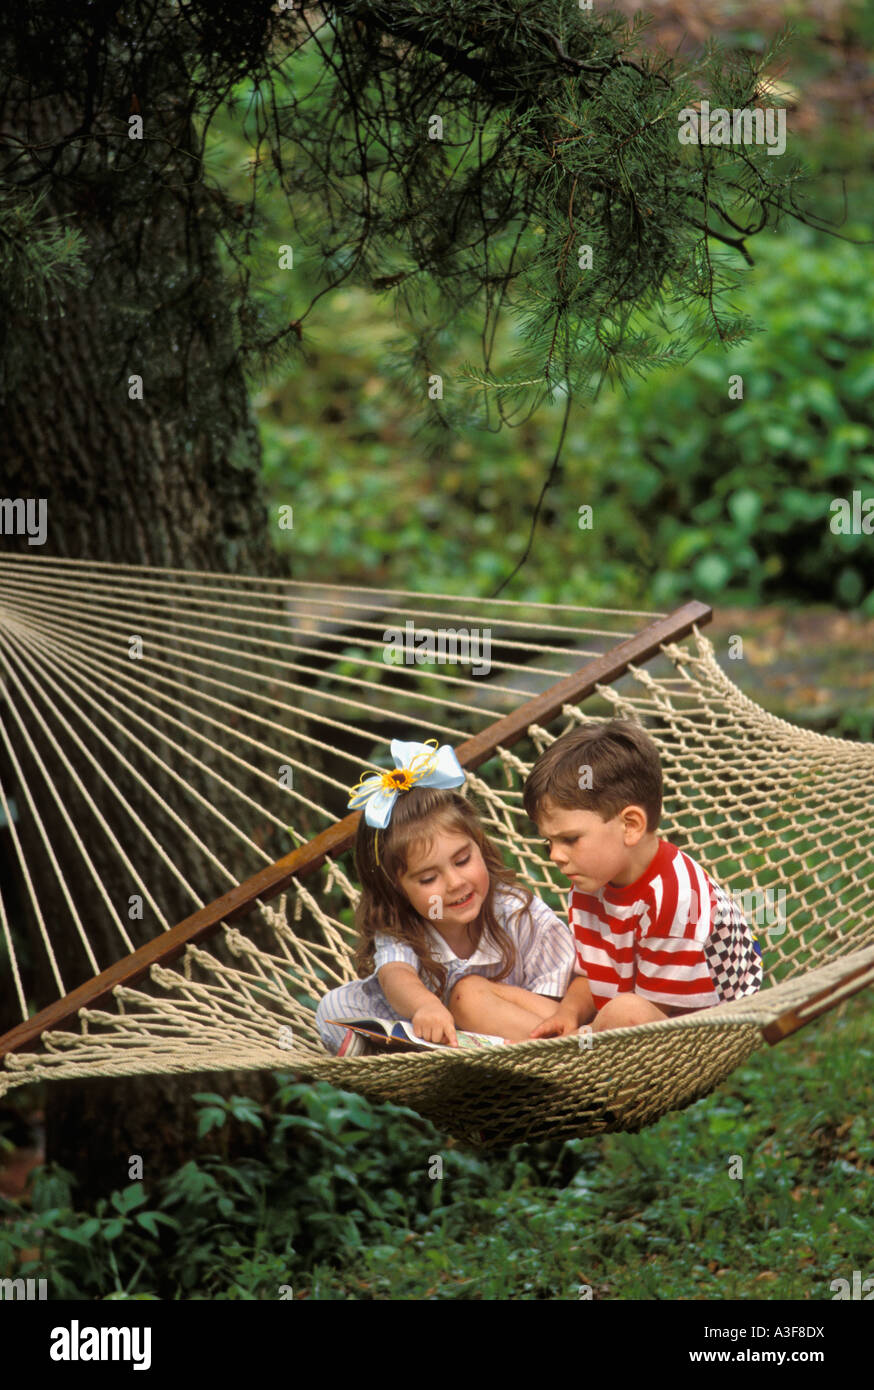 Young Brother and Sister Looking At Book while Sitting in Hammock United States Stock Photo